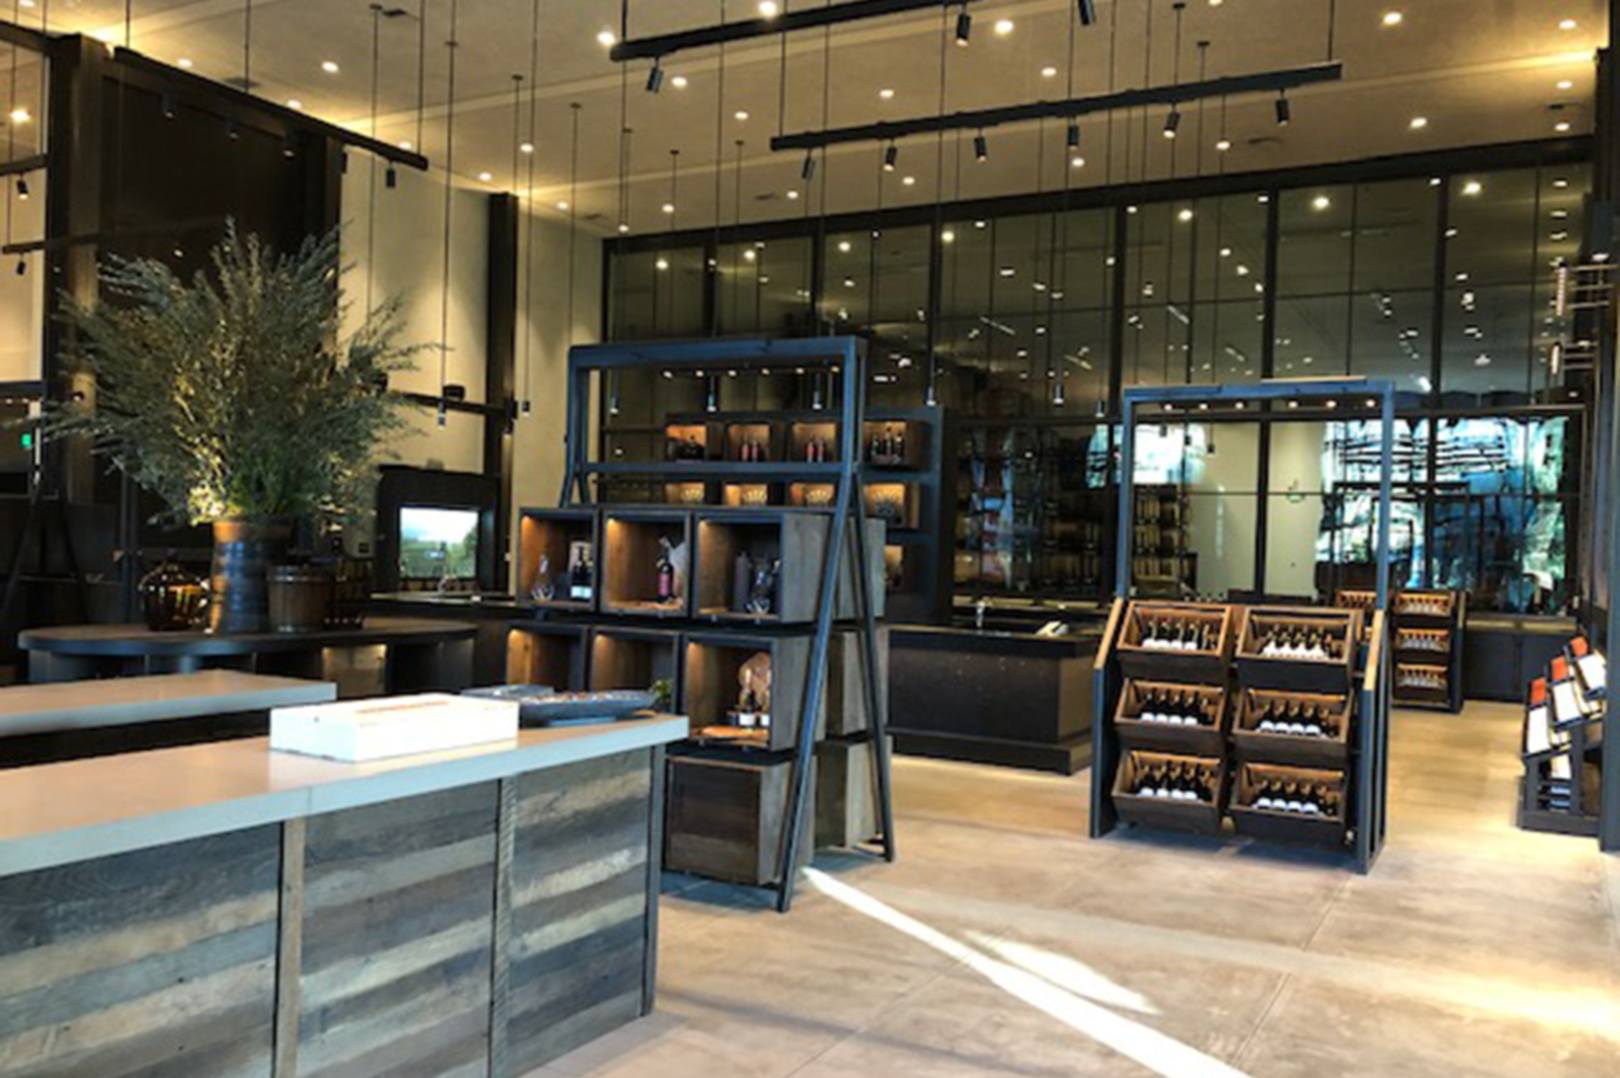 Louis M. Martini Winery interior renovation and remodel completed by FDC in Sonoma County